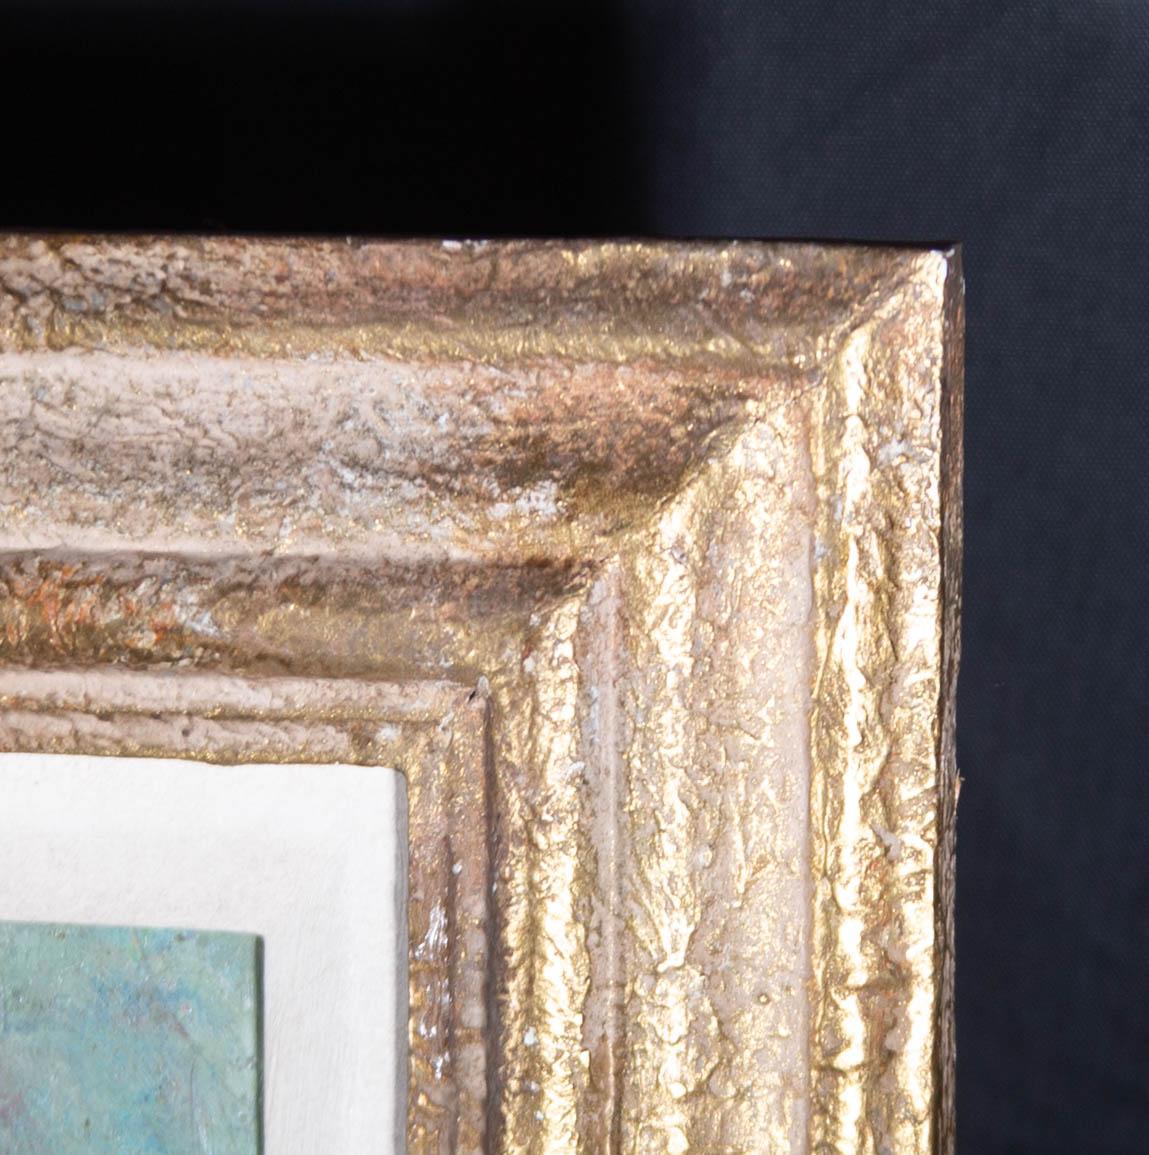 An expressive impasto painting of a figure in a landscape, possibly kneeling as he tends to some plants. Presented in a textured and distressed gilt-effect wooden frame with a white painted slip. Unsigned. On canvas board.